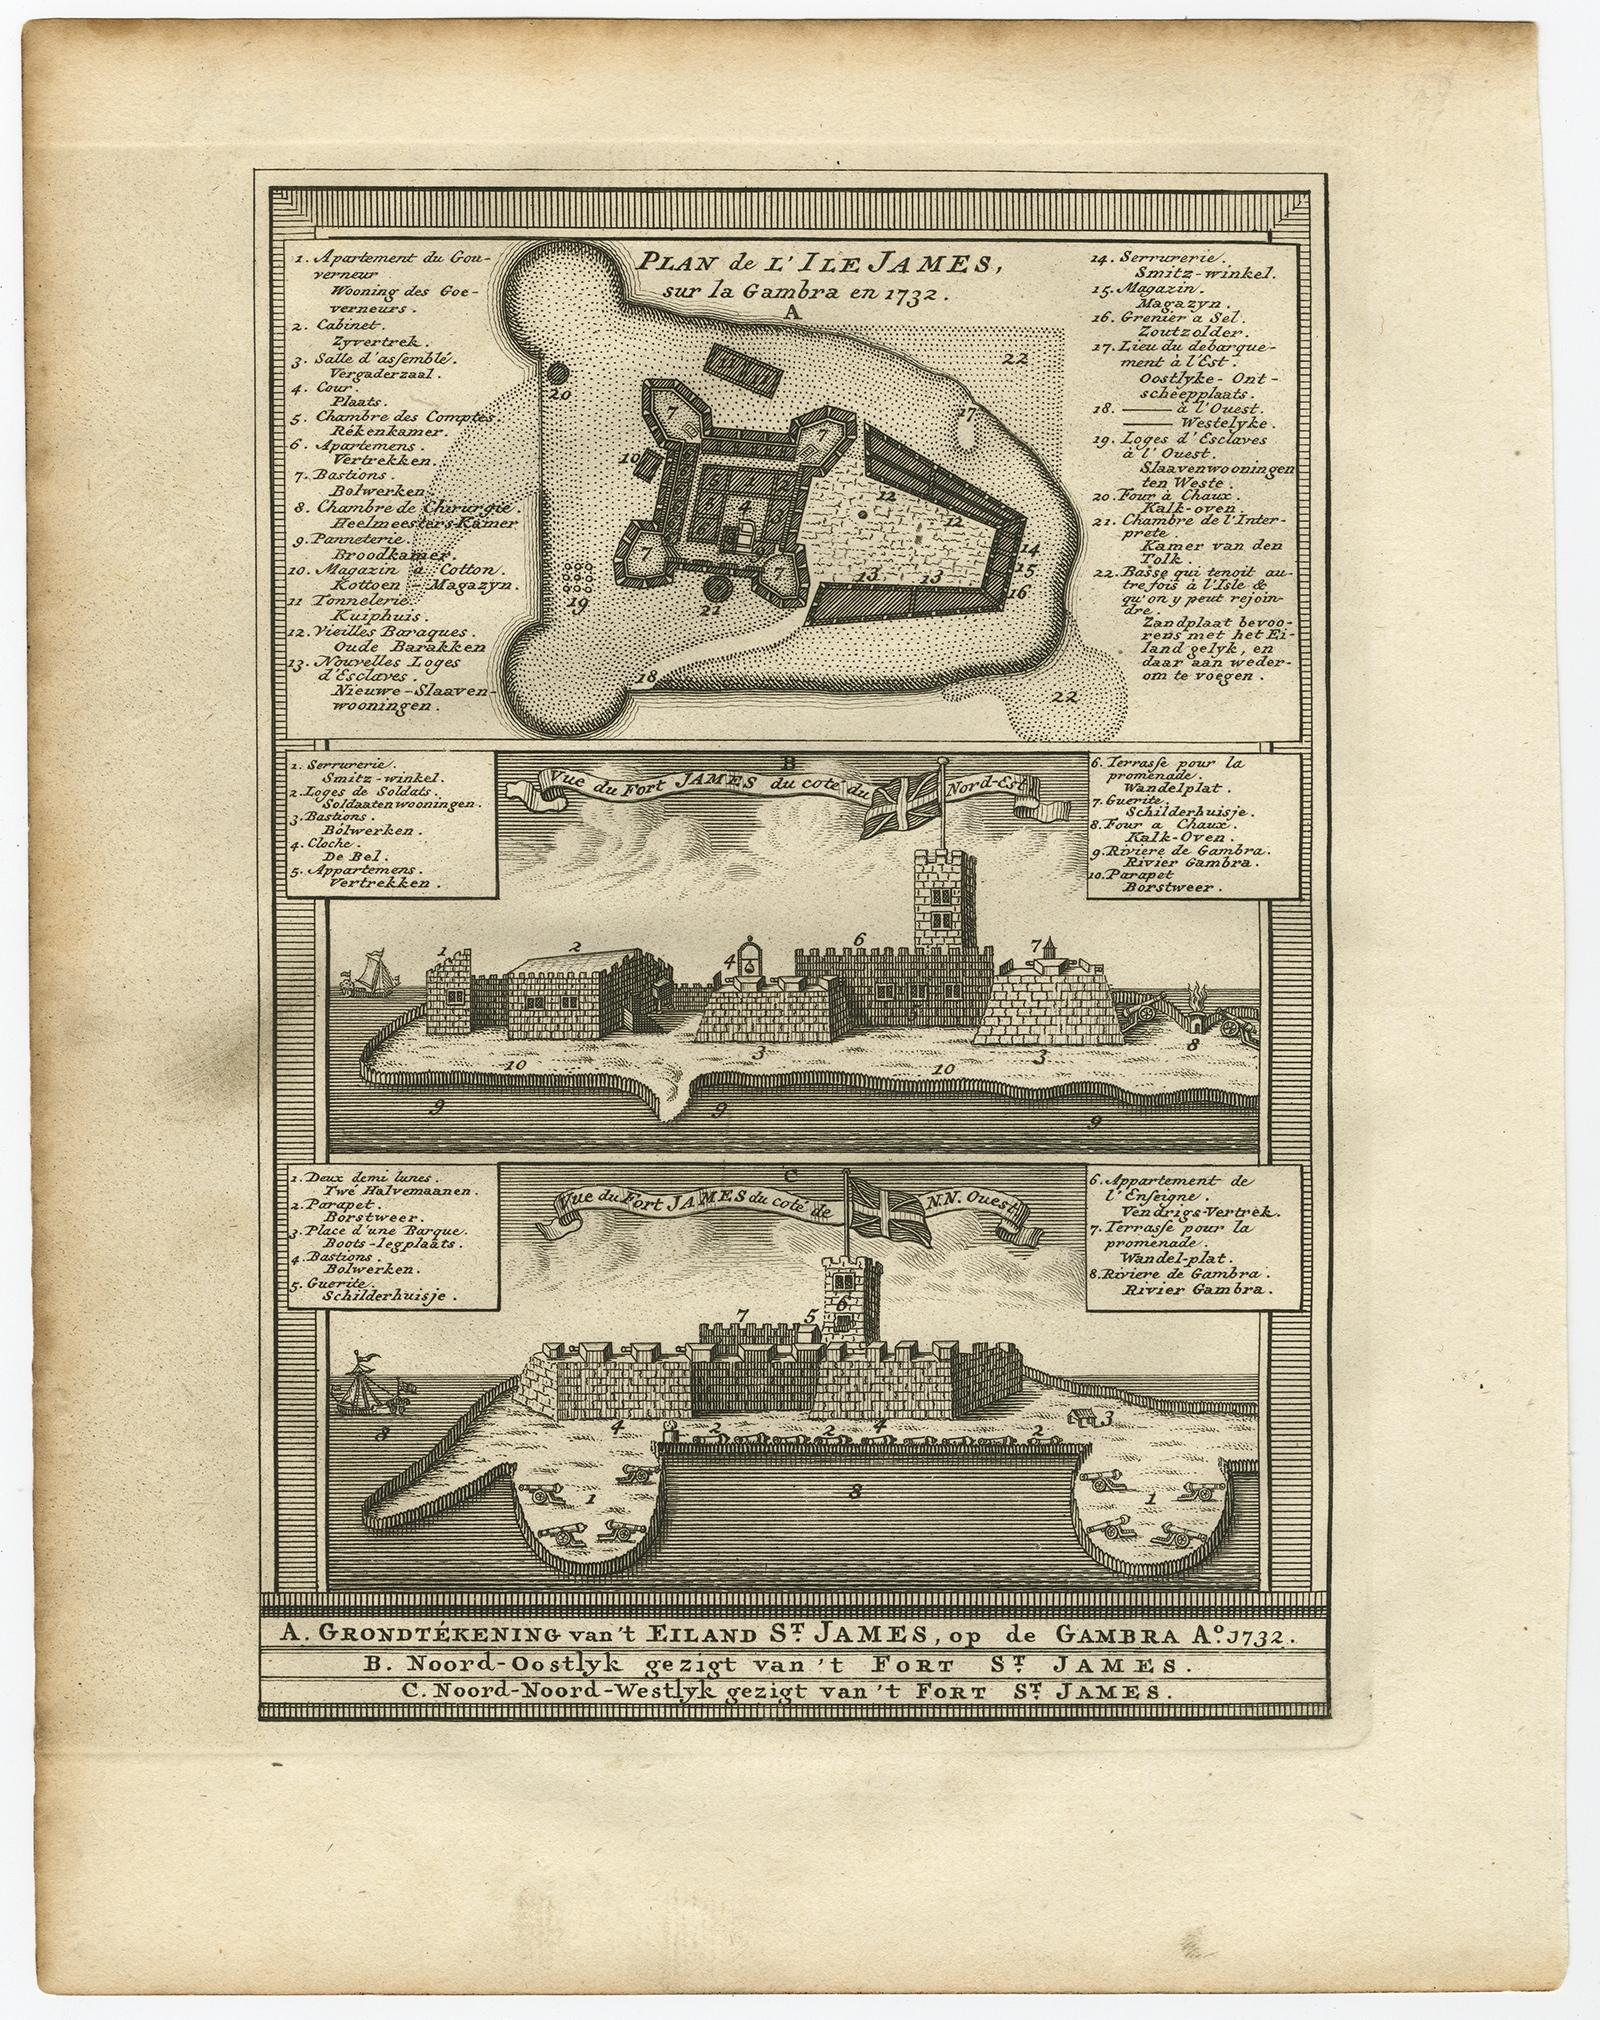 Plan de l’Isle James sur la Gambra en 1732 (…).

Copperplate engraving/etching on Hand laid (Verge) paper.
Sheet size: 19,7 x 26,7 cm. Image size: 13,8 x 19,8 cm.

From vol. 3 of a Dutch ed. of Prevost’s monumental work: ‘Historische